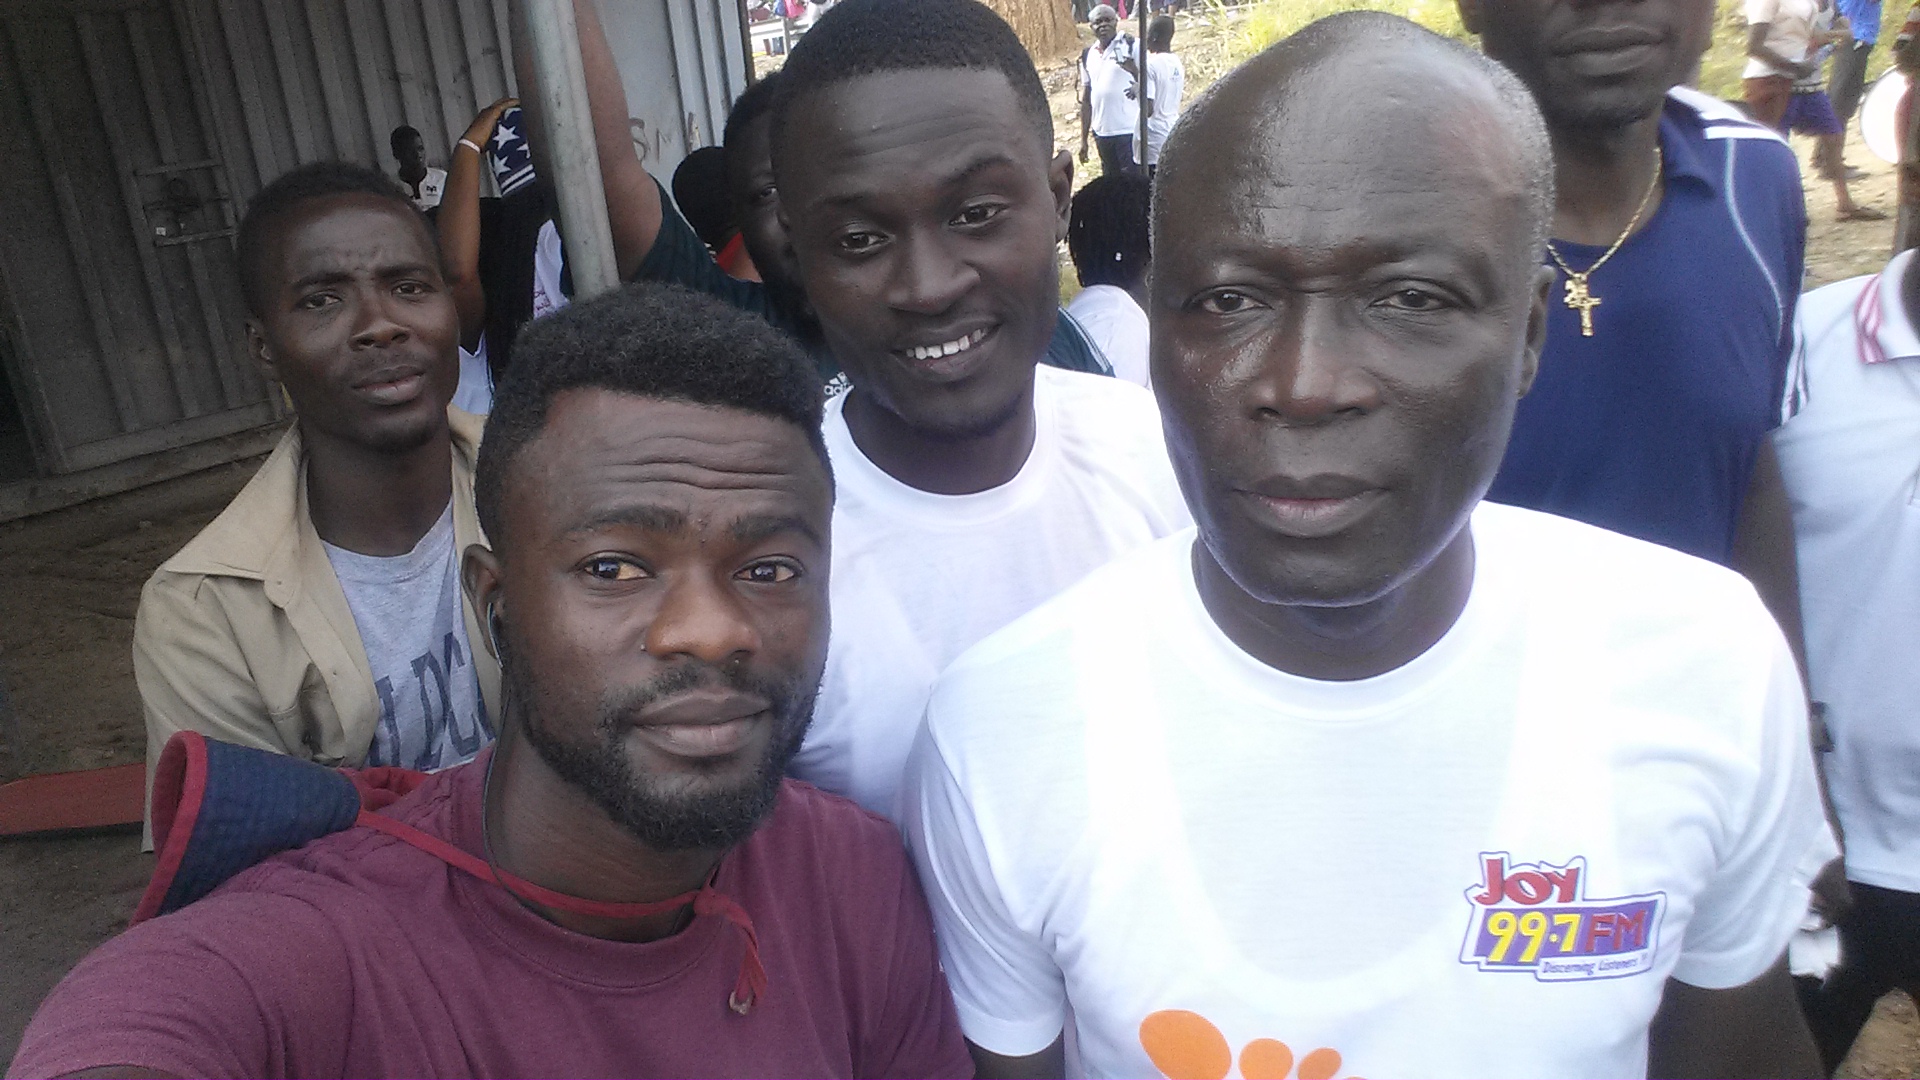 [PHOTOS] Over Hundred People Took Part In "Walk With Lexis" Up Aburi Mountain 